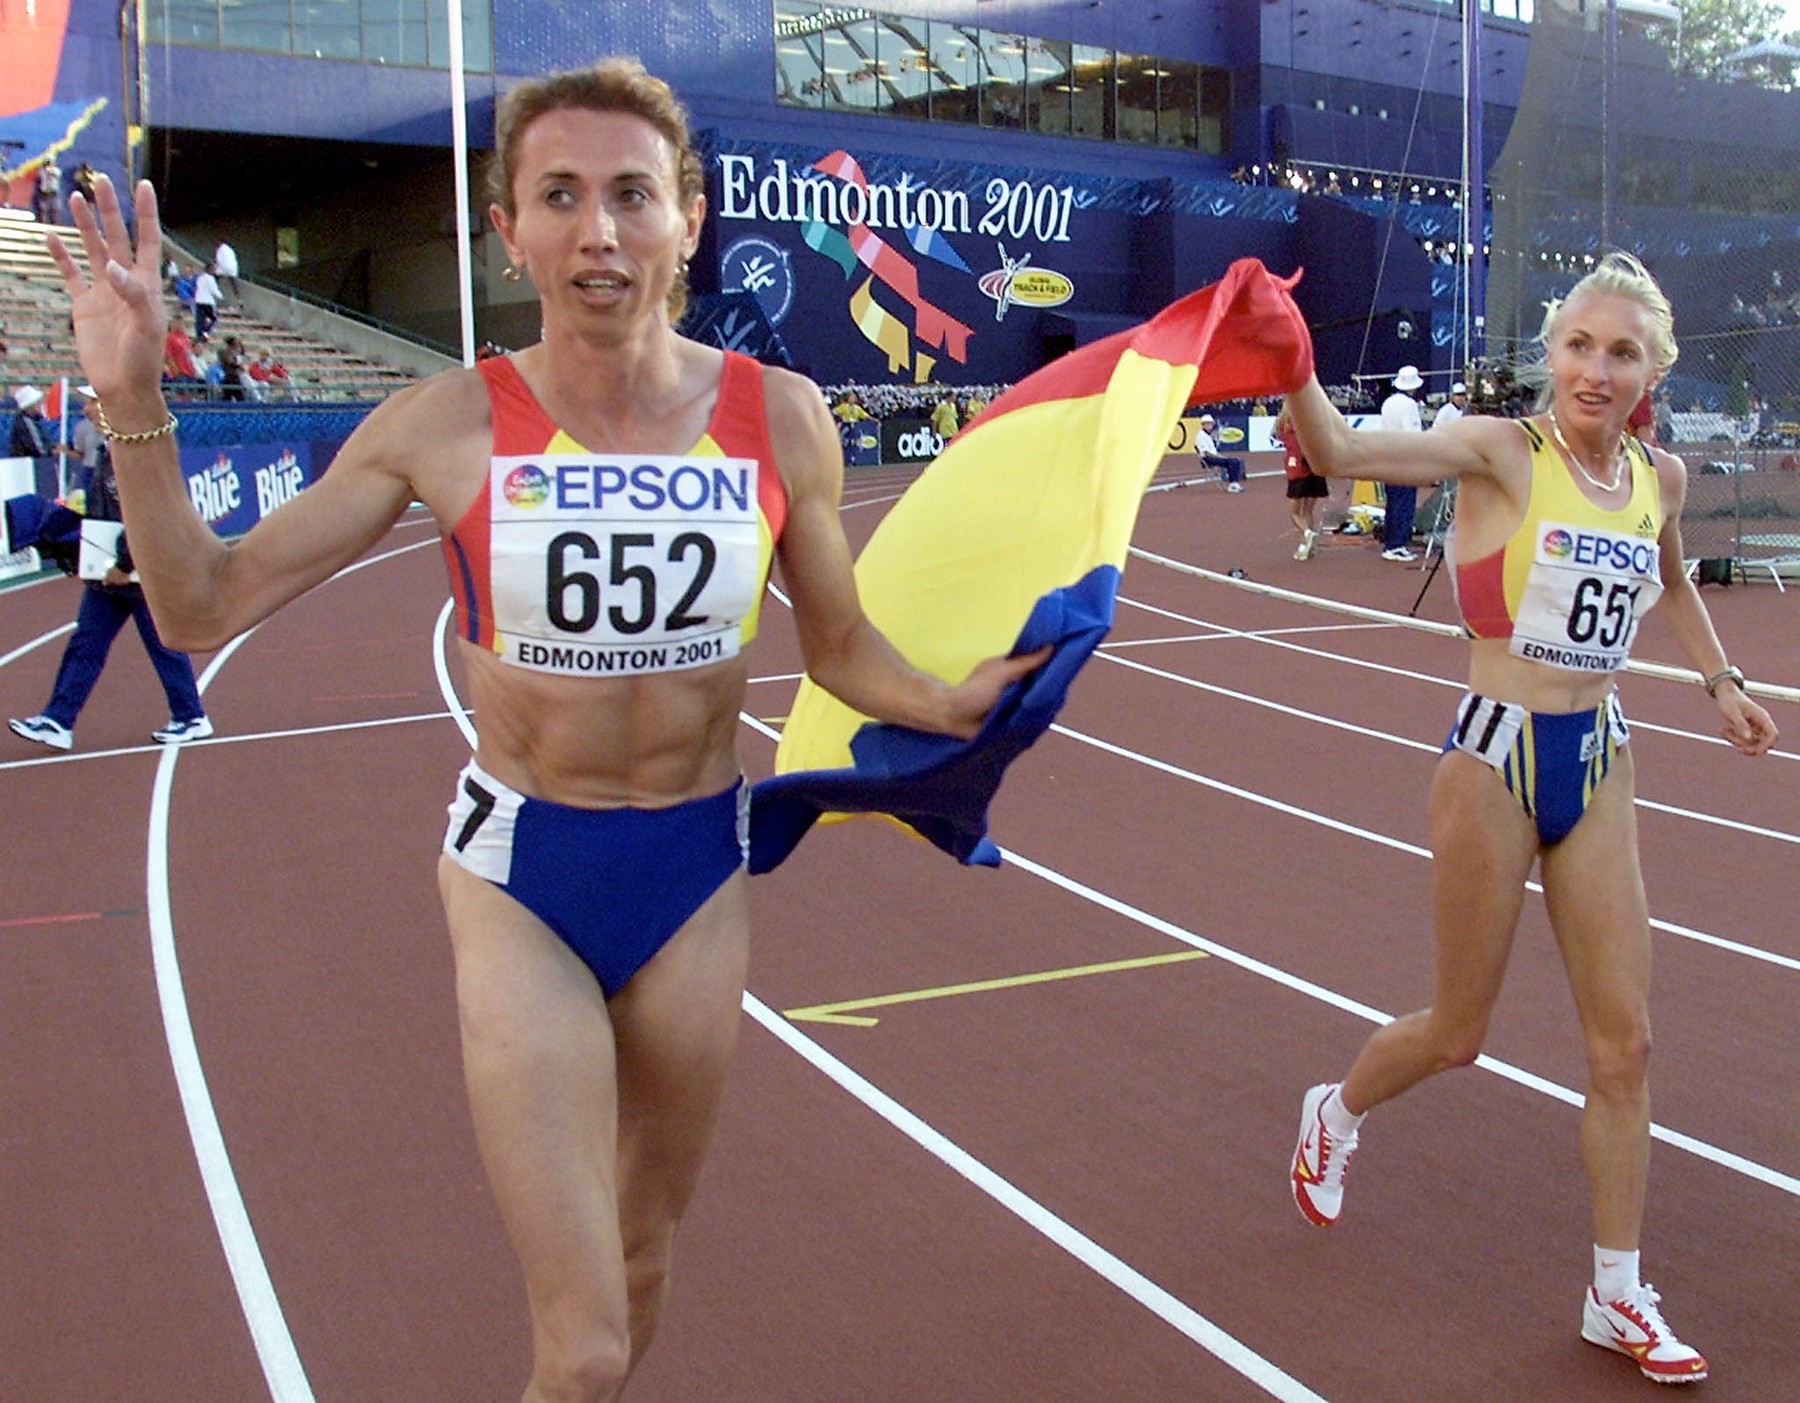 Gabriela Szabo of Romania (R) and compatriot Violeta Szekely celebrate their gold and silver medal wins in the women's 1500M final at the 8th World Championships in Athletics 07 August, 2001, in Commonwealth Stadium in Edmonton Canada. Szabo took the gold in 4:00.57 and Szekely wonthe silver in 4:01.70.,Image: 69151372, License: Rights-managed, Restrictions: , Model Release: no, Credit line: Profimedia